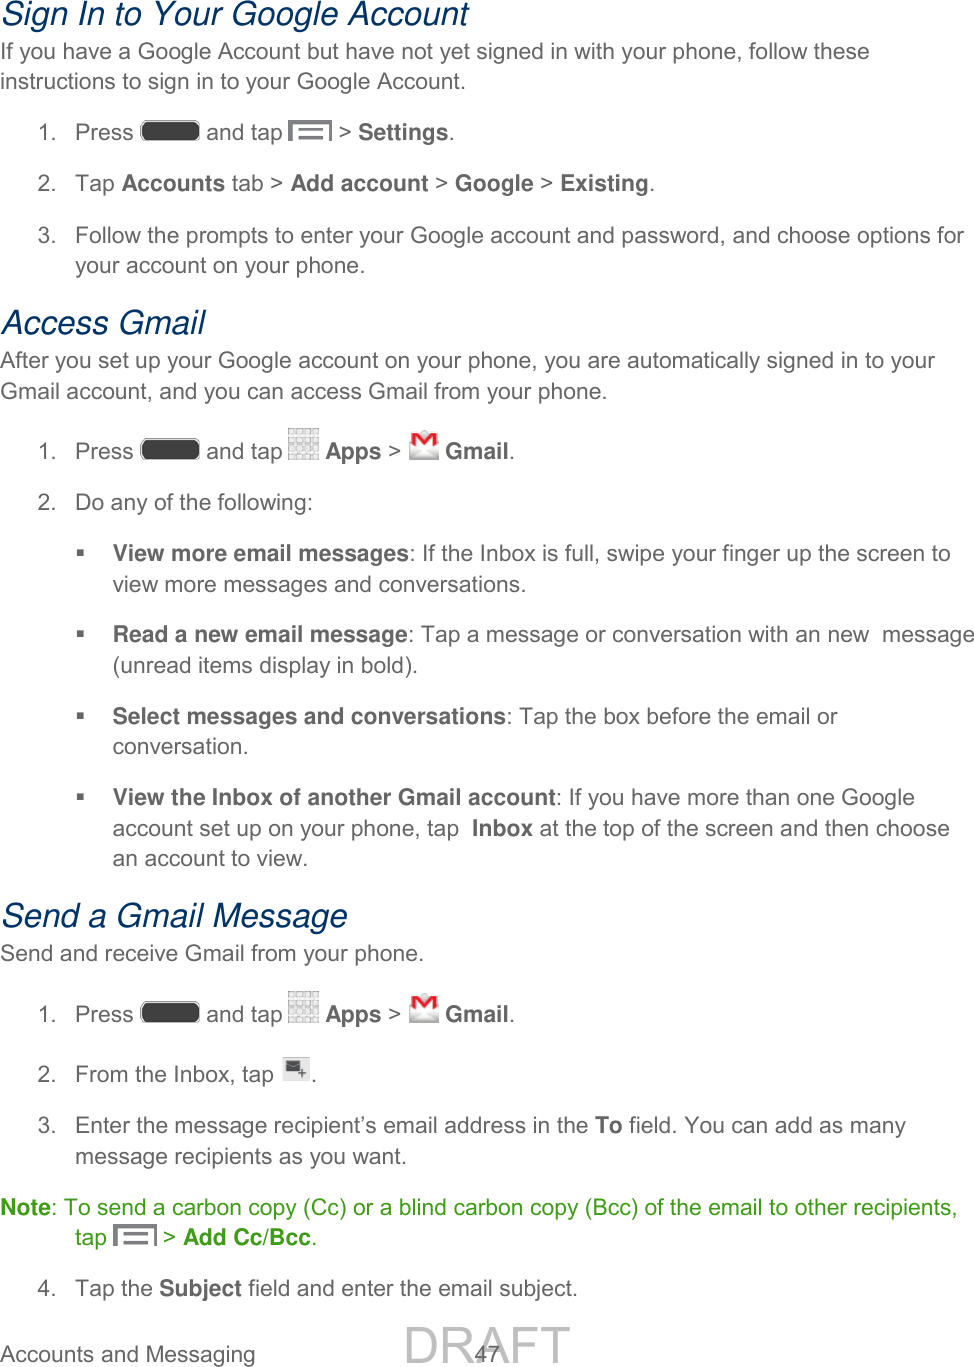 DRAFT FOR INTERNAL USE ONLY Accounts and Messaging  47    Sign In to Your Google Account If you have a Google Account but have not yet signed in with your phone, follow these instructions to sign in to your Google Account. 1.  Press   and tap   &gt; Settings. 2.  Tap Accounts tab &gt; Add account &gt; Google &gt; Existing.  3.  Follow the prompts to enter your Google account and password, and choose options for your account on your phone. Access Gmail After you set up your Google account on your phone, you are automatically signed in to your Gmail account, and you can access Gmail from your phone.  1.  Press   and tap   Apps &gt;   Gmail. 2.  Do any of the following:  View more email messages: If the Inbox is full, swipe your finger up the screen to view more messages and conversations.  Read a new email message: Tap a message or conversation with an new  message (unread items display in bold).   Select messages and conversations: Tap the box before the email or conversation.  View the Inbox of another Gmail account: If you have more than one Google account set up on your phone, tap  Inbox at the top of the screen and then choose an account to view. Send a Gmail Message Send and receive Gmail from your phone. 1.  Press   and tap   Apps &gt;   Gmail. 2.  From the Inbox, tap  . 3. Enter the message recipient’s email address in the To field. You can add as many message recipients as you want. Note: To send a carbon copy (Cc) or a blind carbon copy (Bcc) of the email to other recipients, tap   &gt; Add Cc/Bcc. 4.  Tap the Subject field and enter the email subject. 